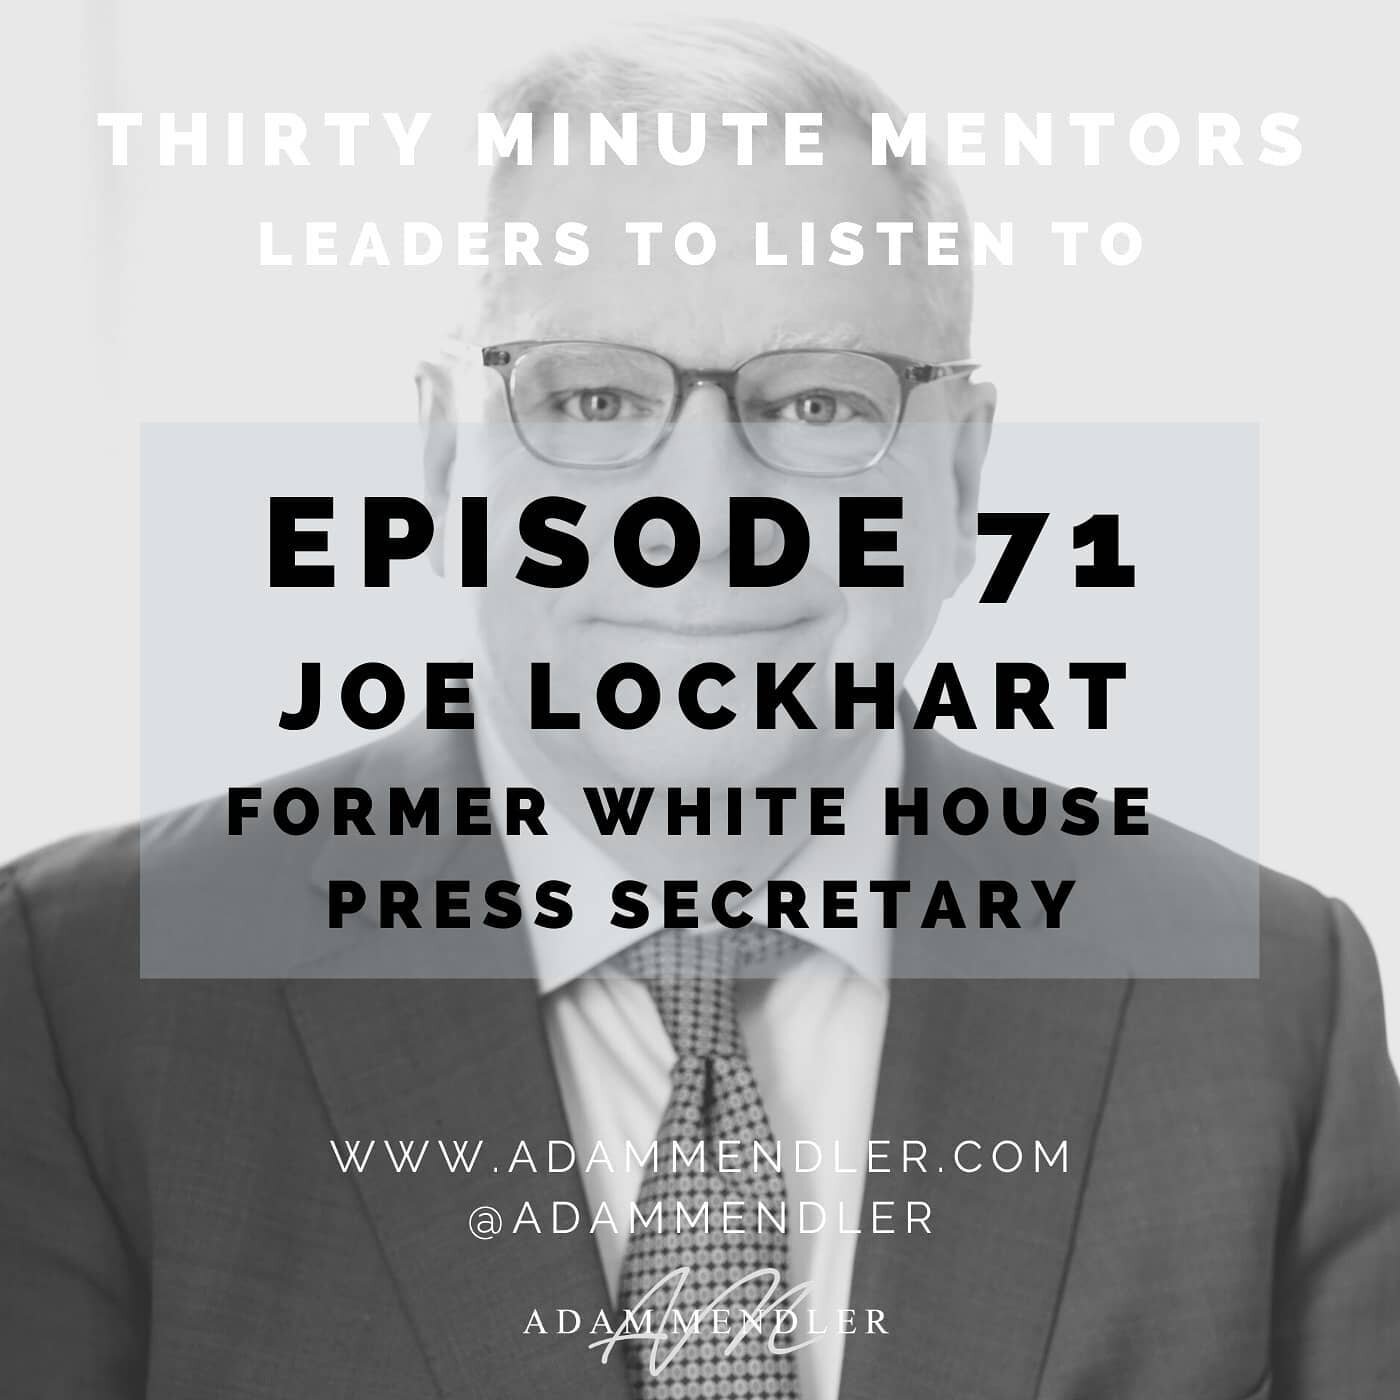 Former White House Press Secretary Joe Lockhart joined me on Episode 71 of Thirty Minute Mentors.&nbsp;Joe served as White House Press Secretary during President Bill Clinton&rsquo;s impeachment and went on to lead communications efforts for Facebook